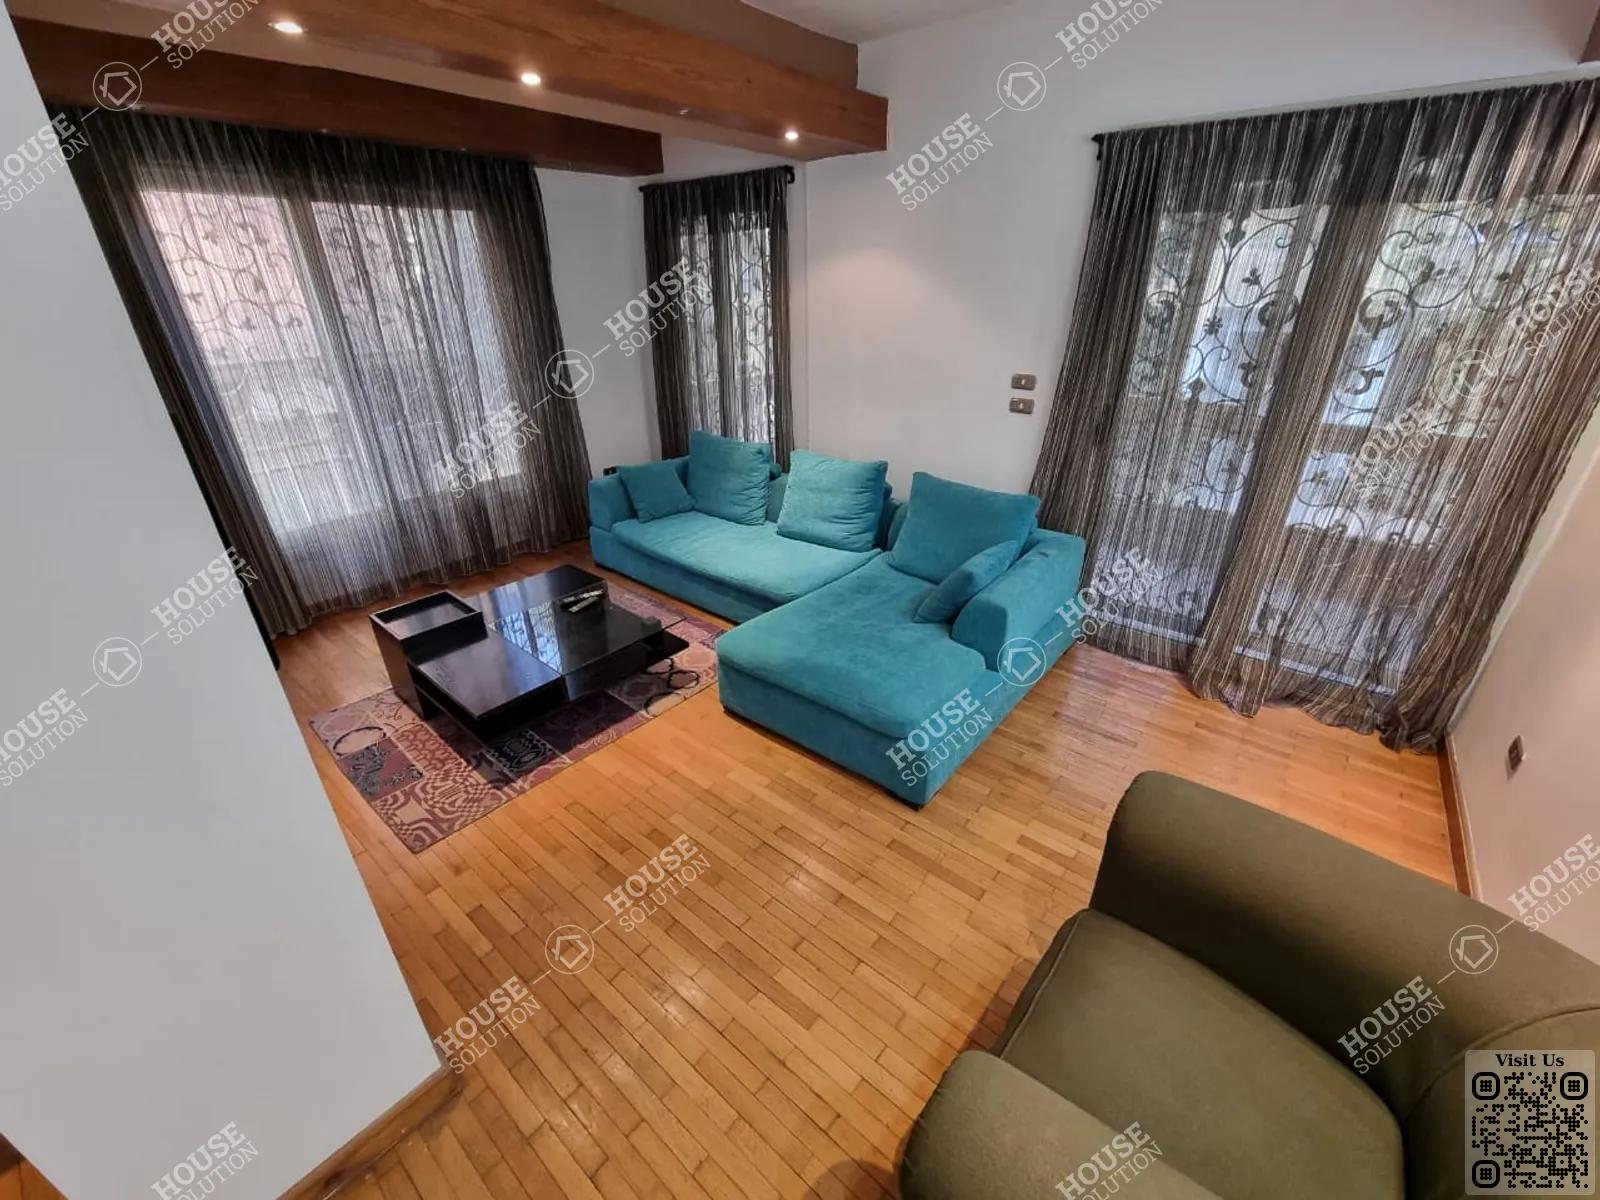 RECEPTION  @ Apartments For Rent In Maadi Maadi Sarayat Area: 150 m² consists of 3 Bedrooms 2 Bathrooms Modern furnished 5 stars #2543-2